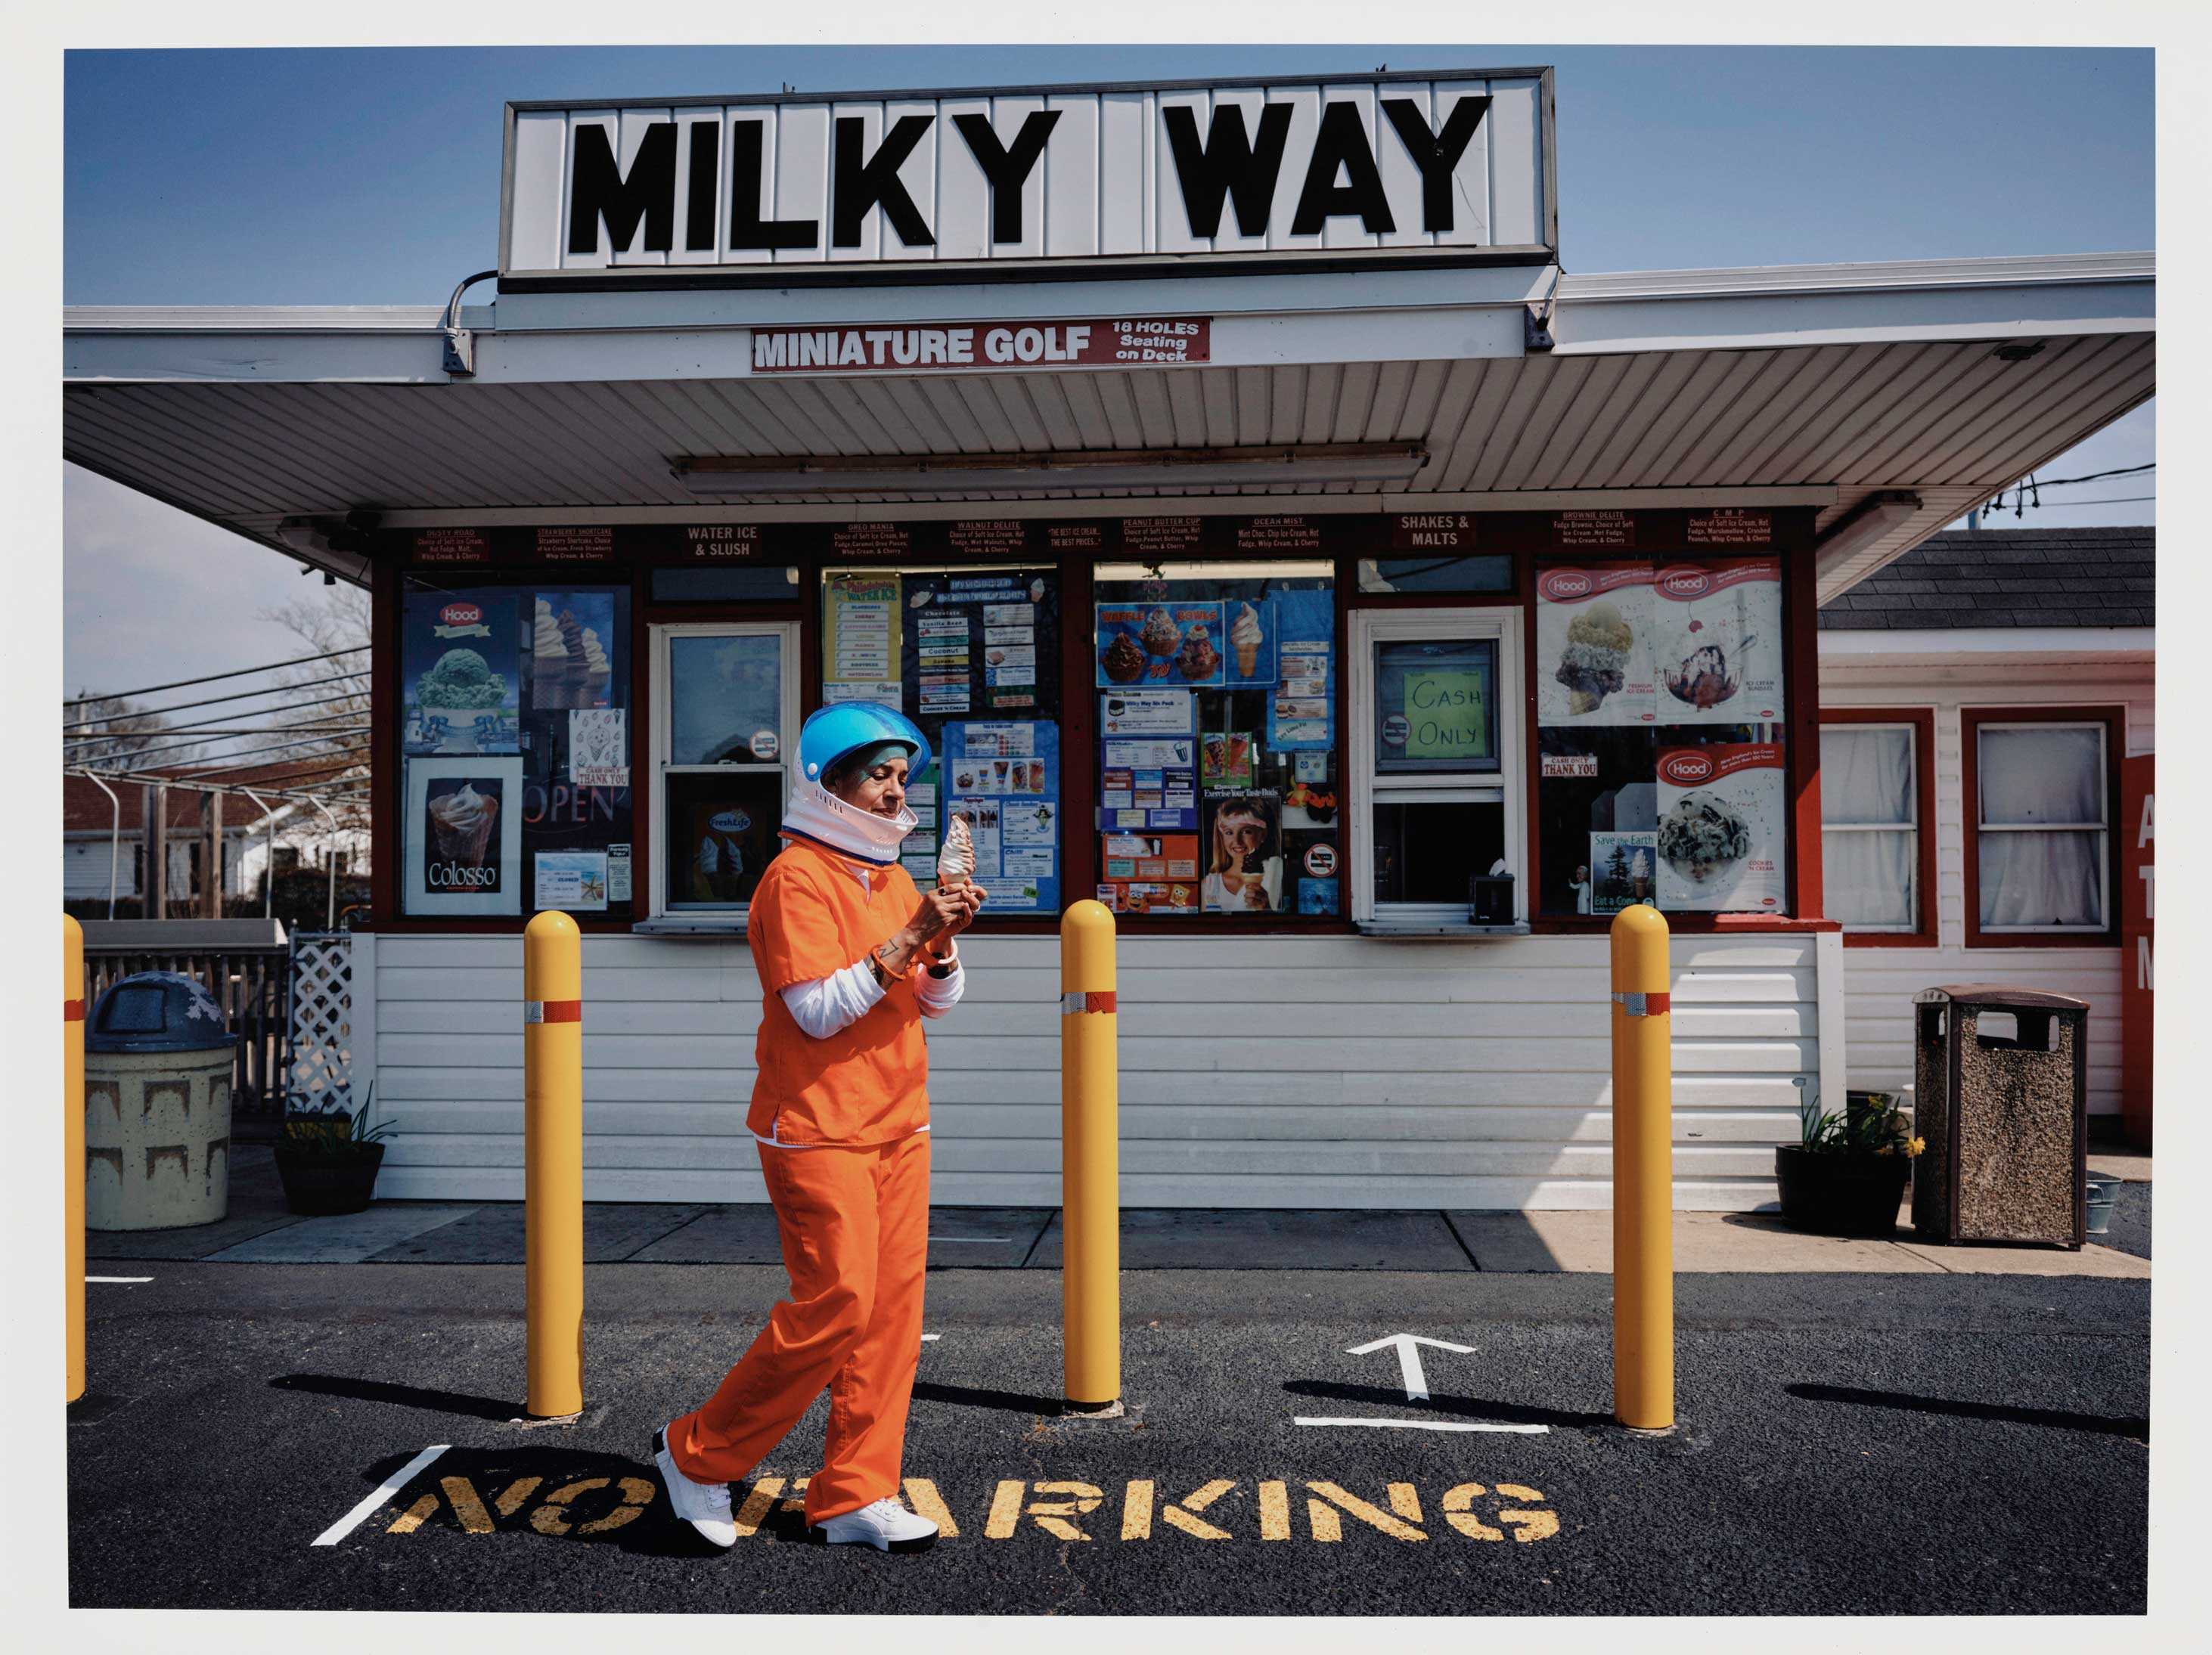 An escaped astronuat prisioner eating soft served ice cream from a small ice cream stand called the Milky Way.